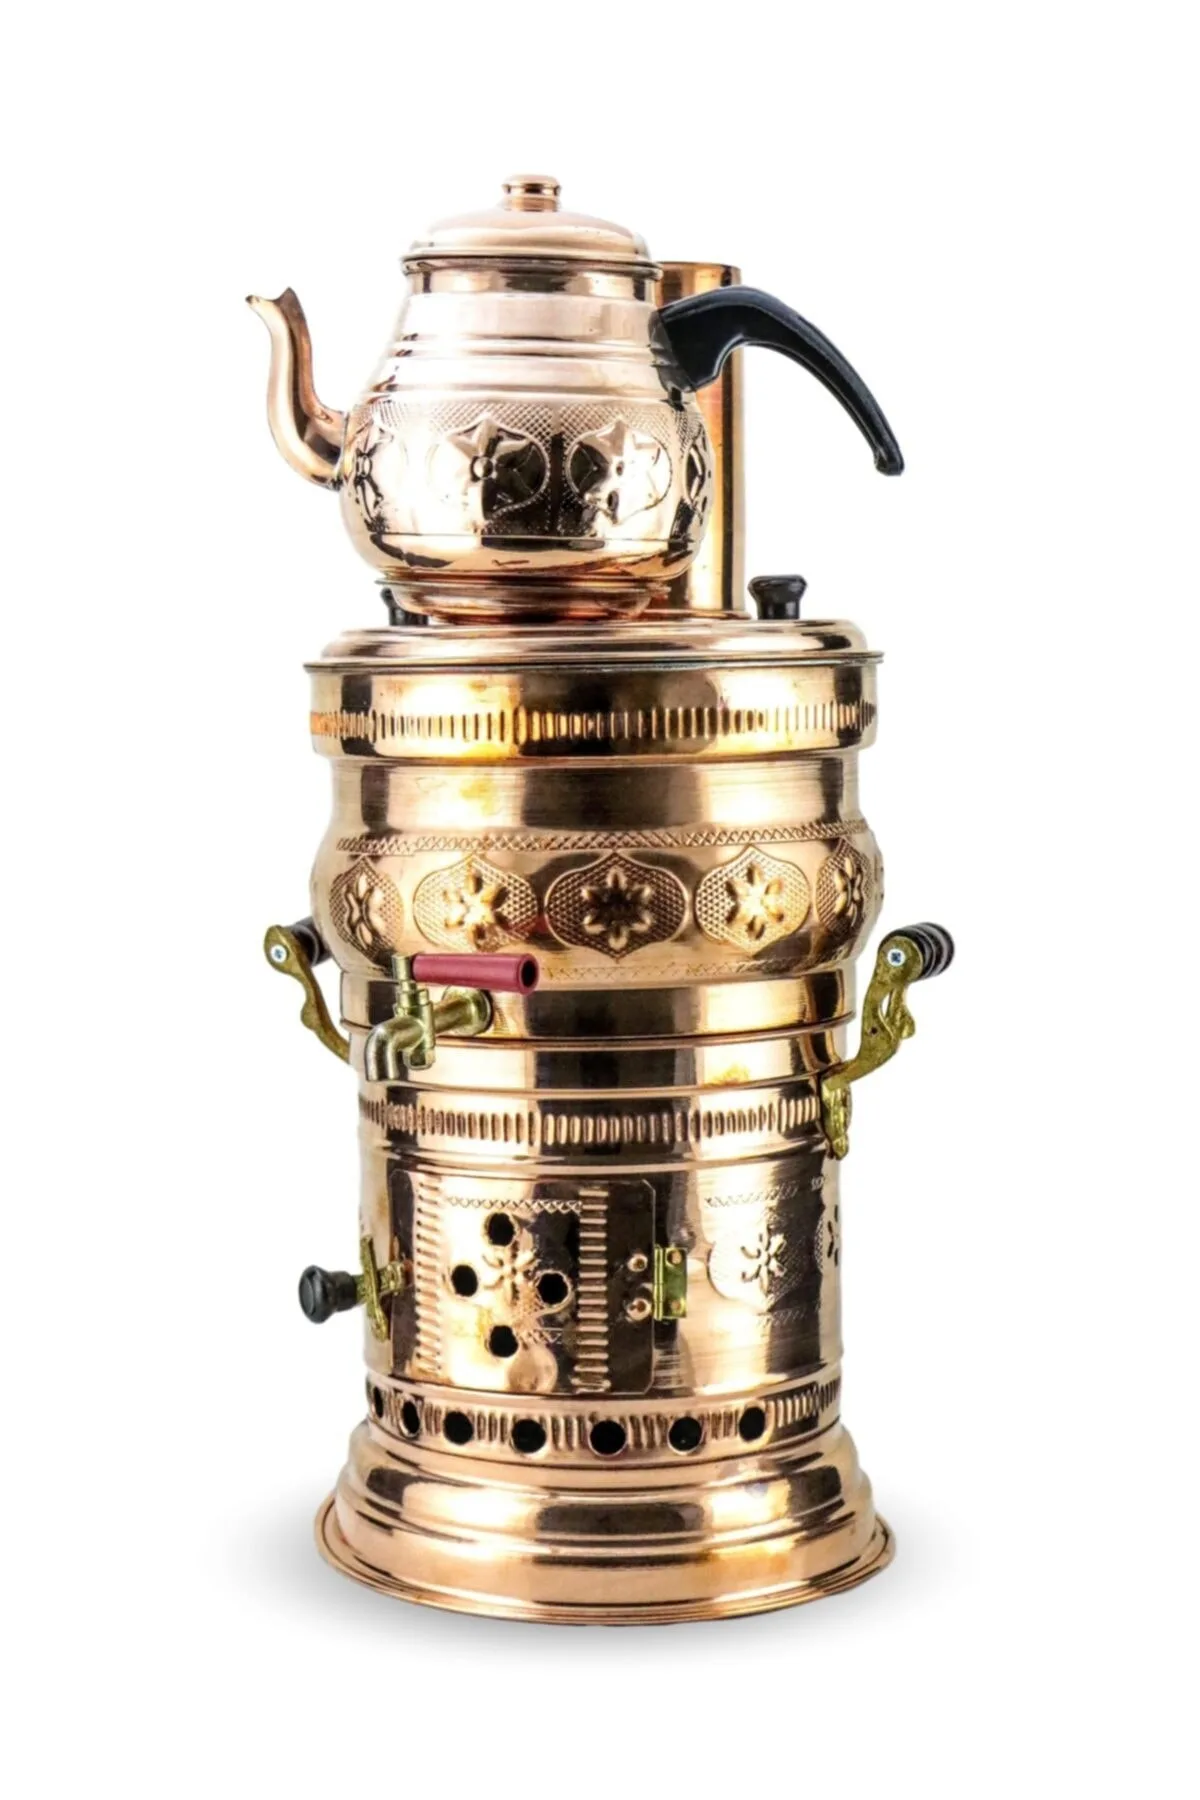 

Copper Handcraft Wood/Coal Samovar Handmade Camp Stove with Teapot Camping Samovar Tea Kettle Water Heater Outdoor BBQ Stove